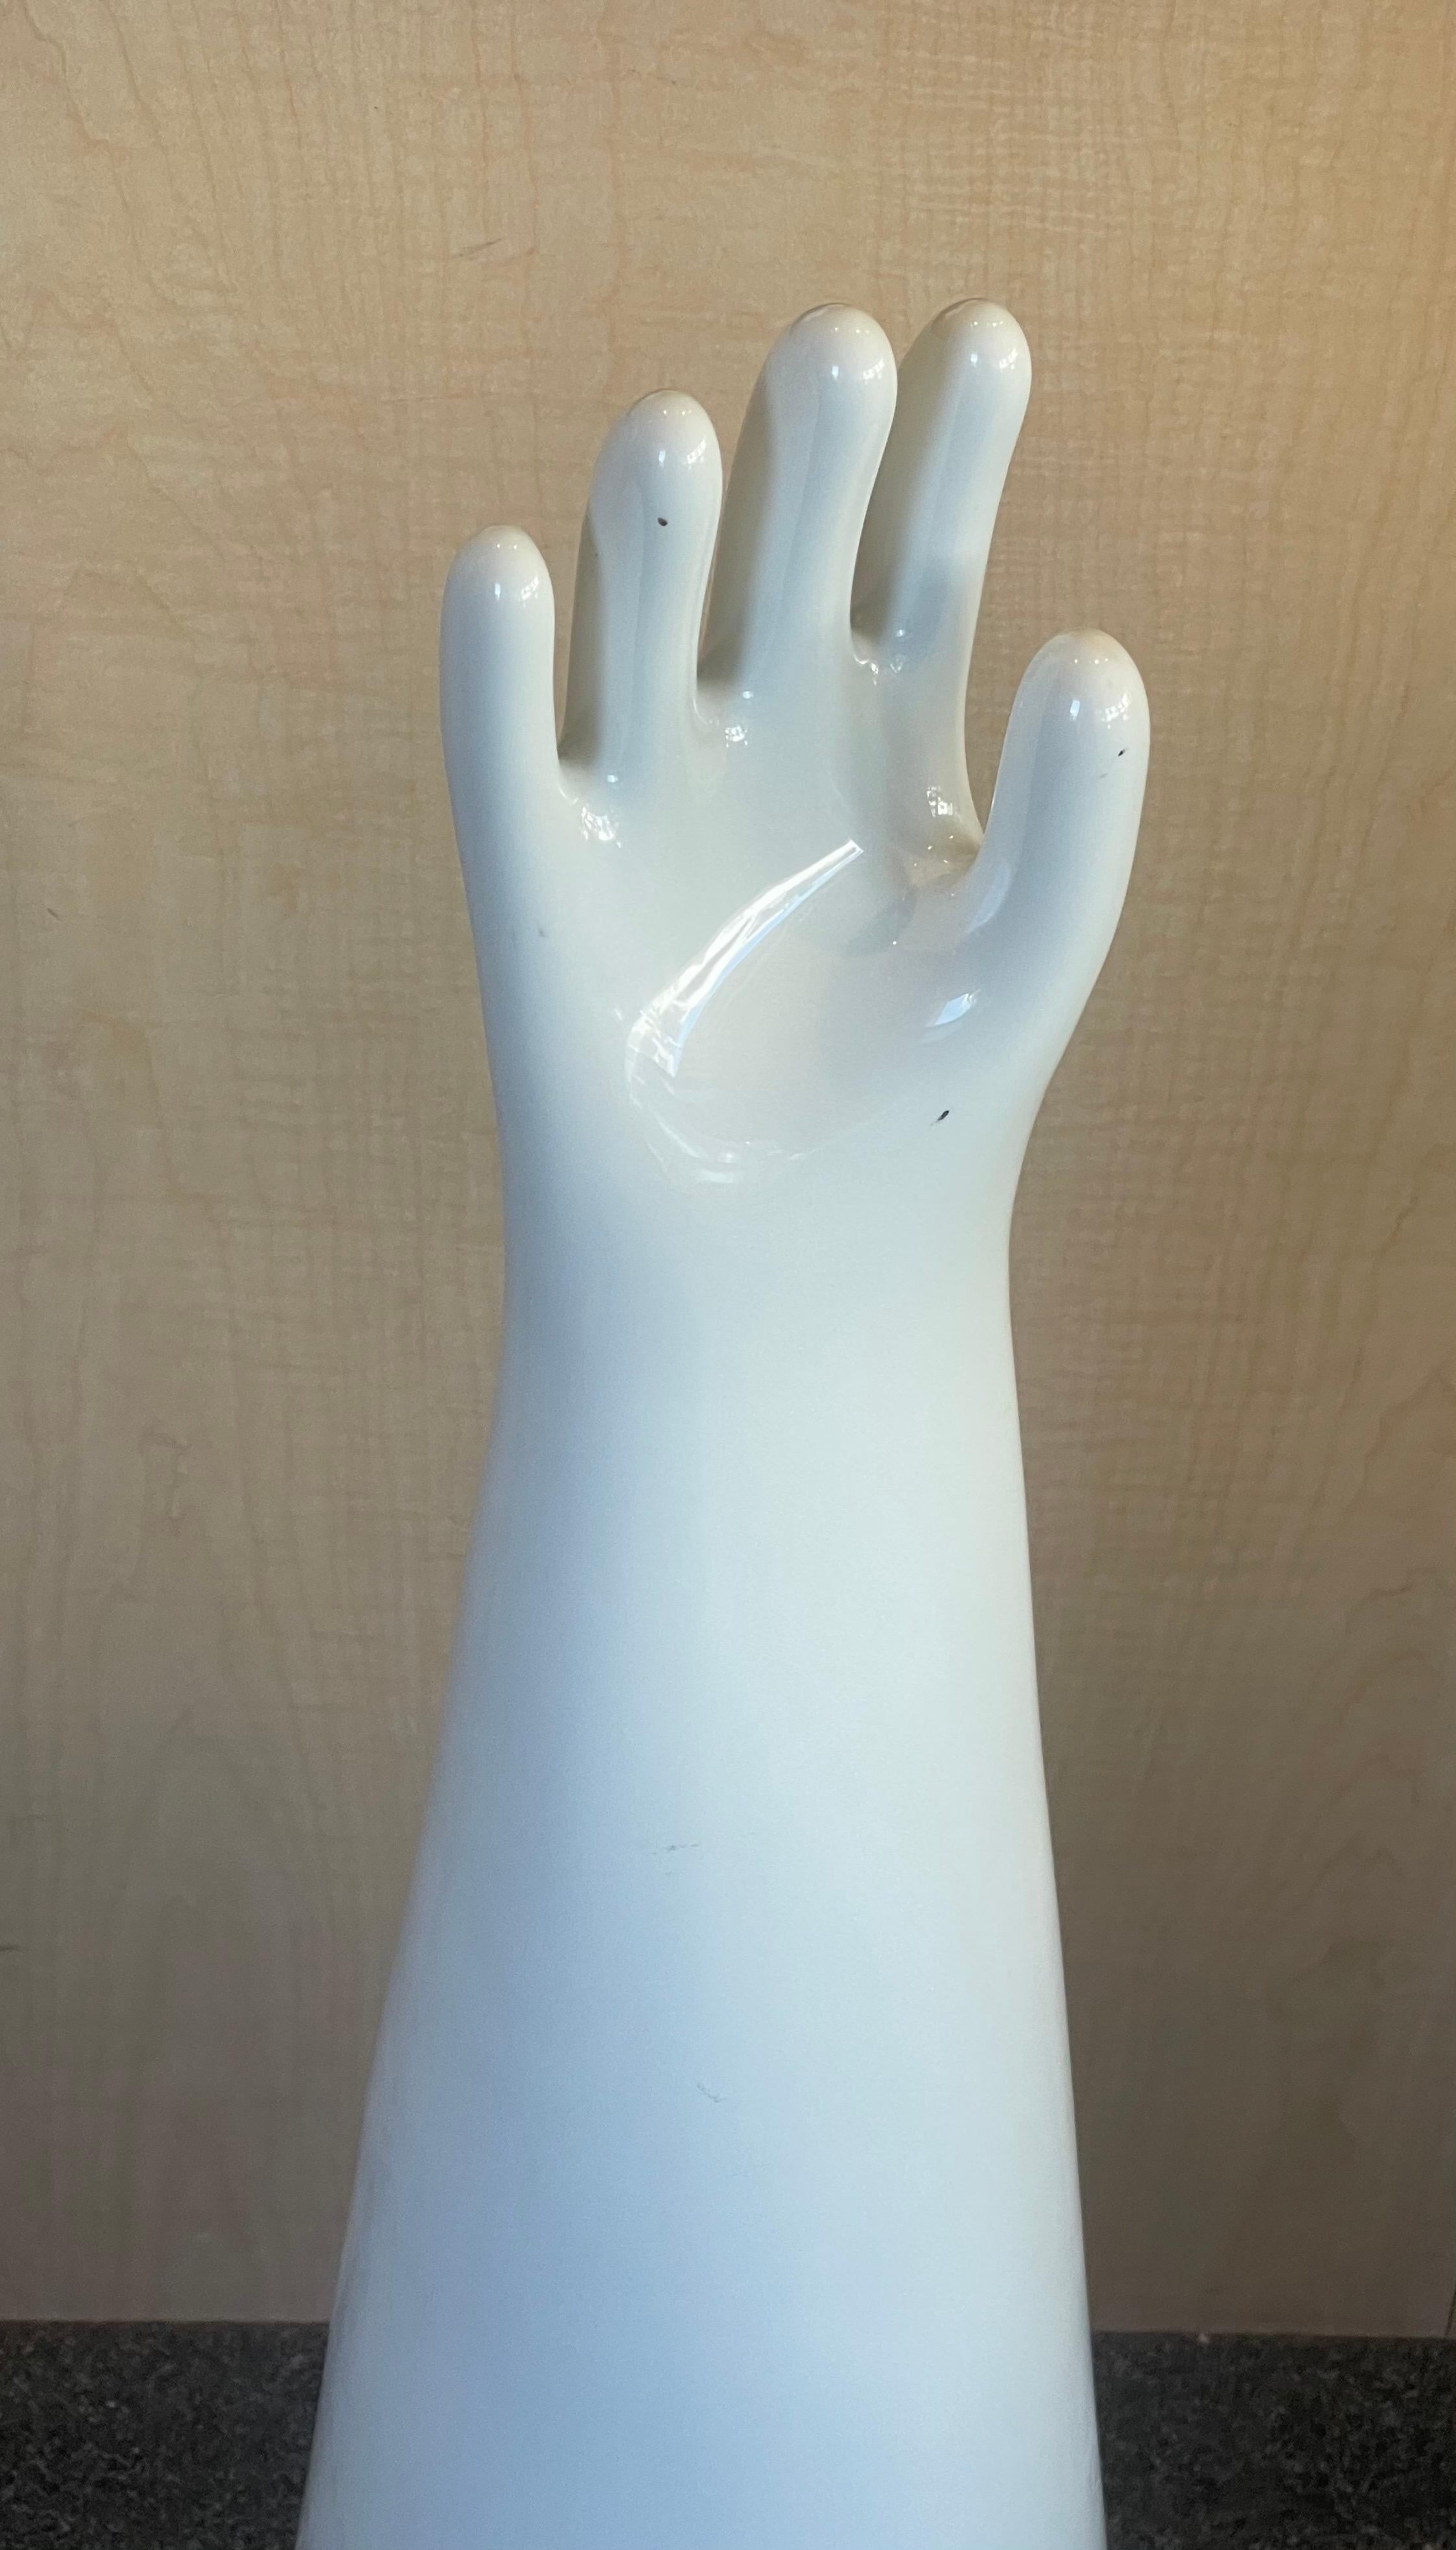 Massive Industrial Ceramic Glove Mold by Shinko of Japan For Sale 1